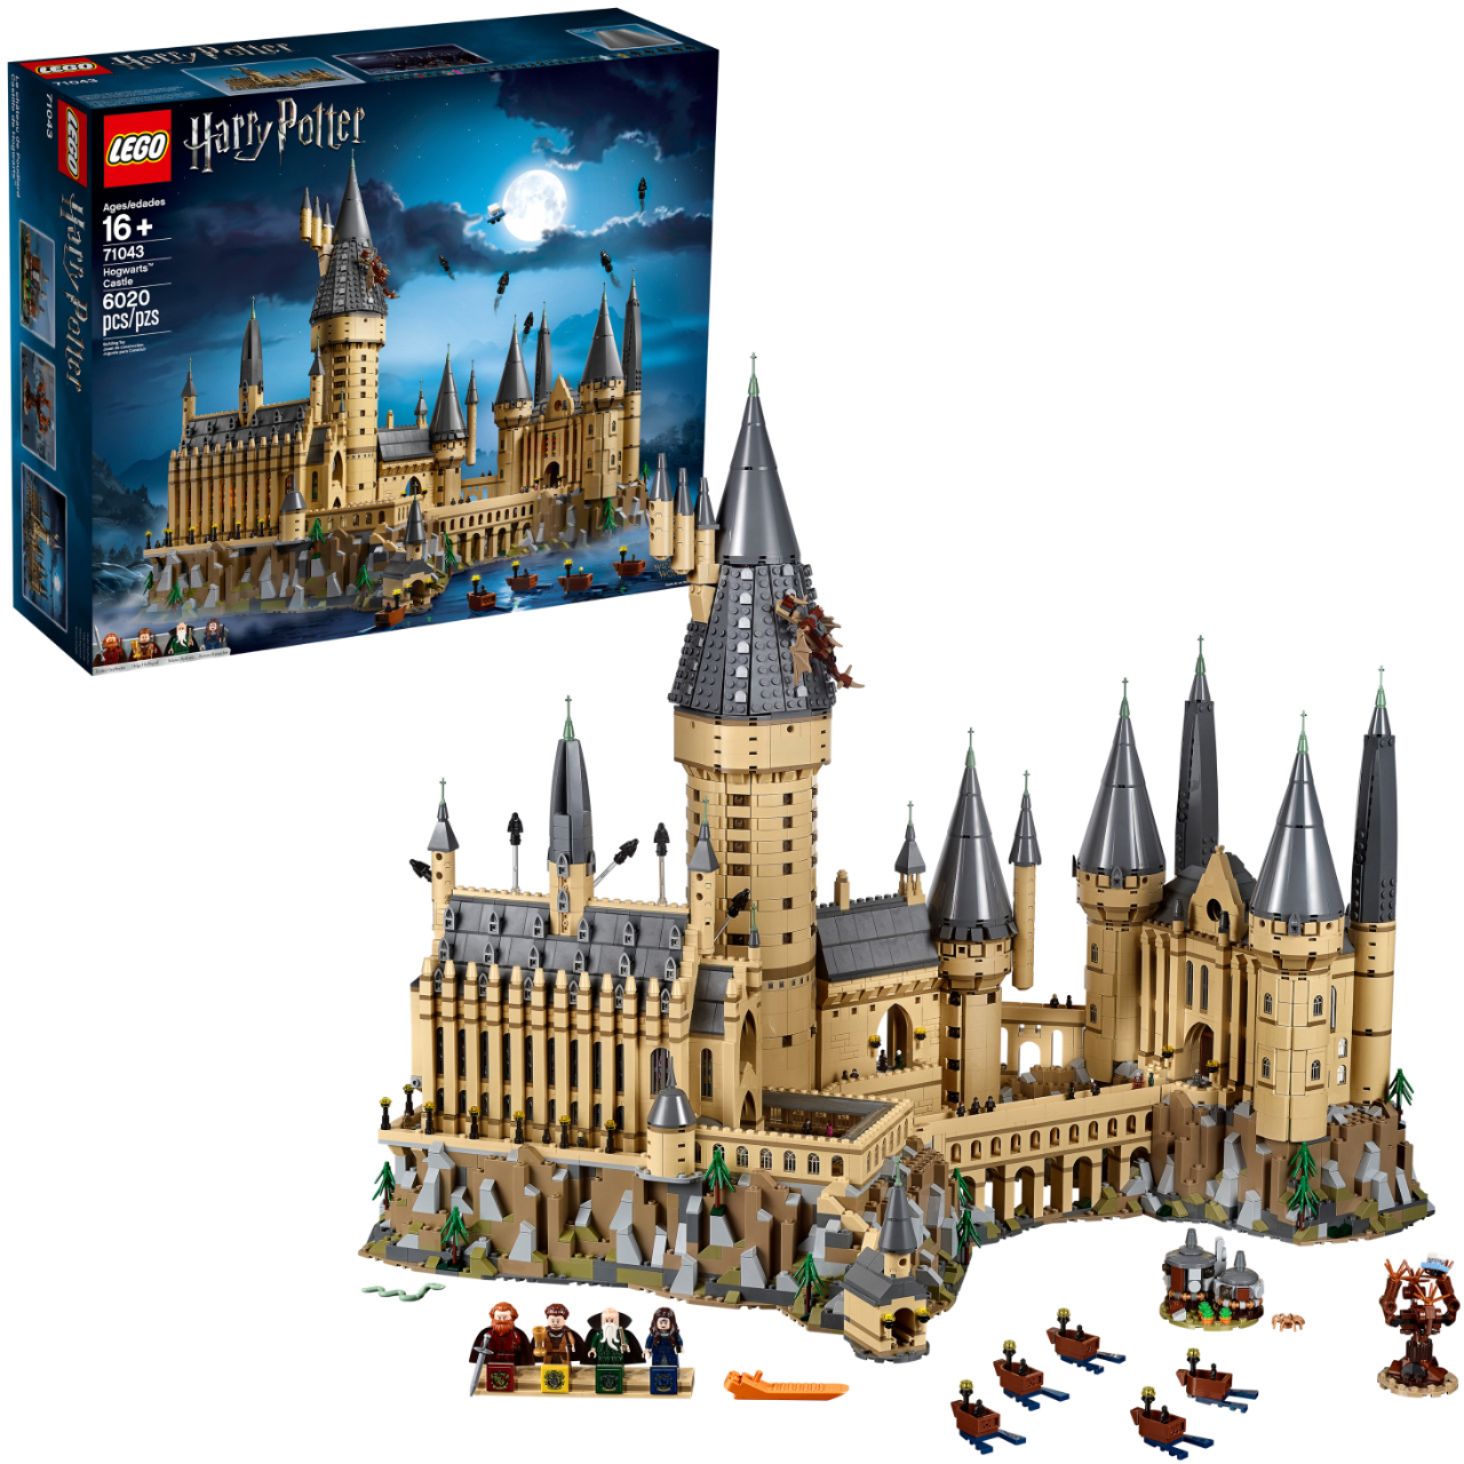 Lego Announces It's Second Largest Playset To Date, The 6000+ Piece Hogwarts  Castle For $399.99